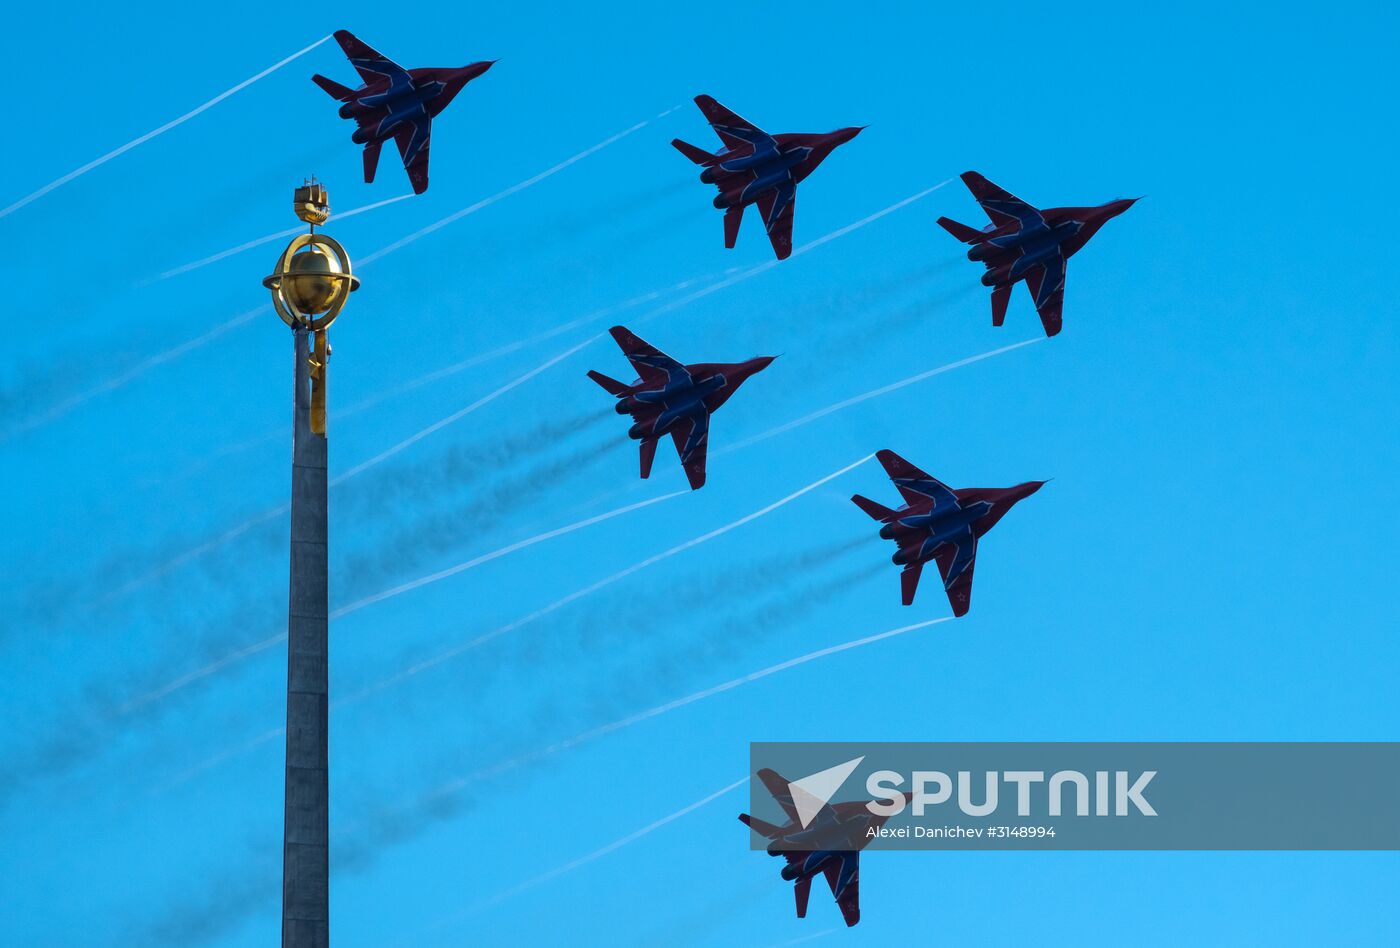 Celebrations mark Russian Aerospace Forces' 105th anniversary in St. Petersburg